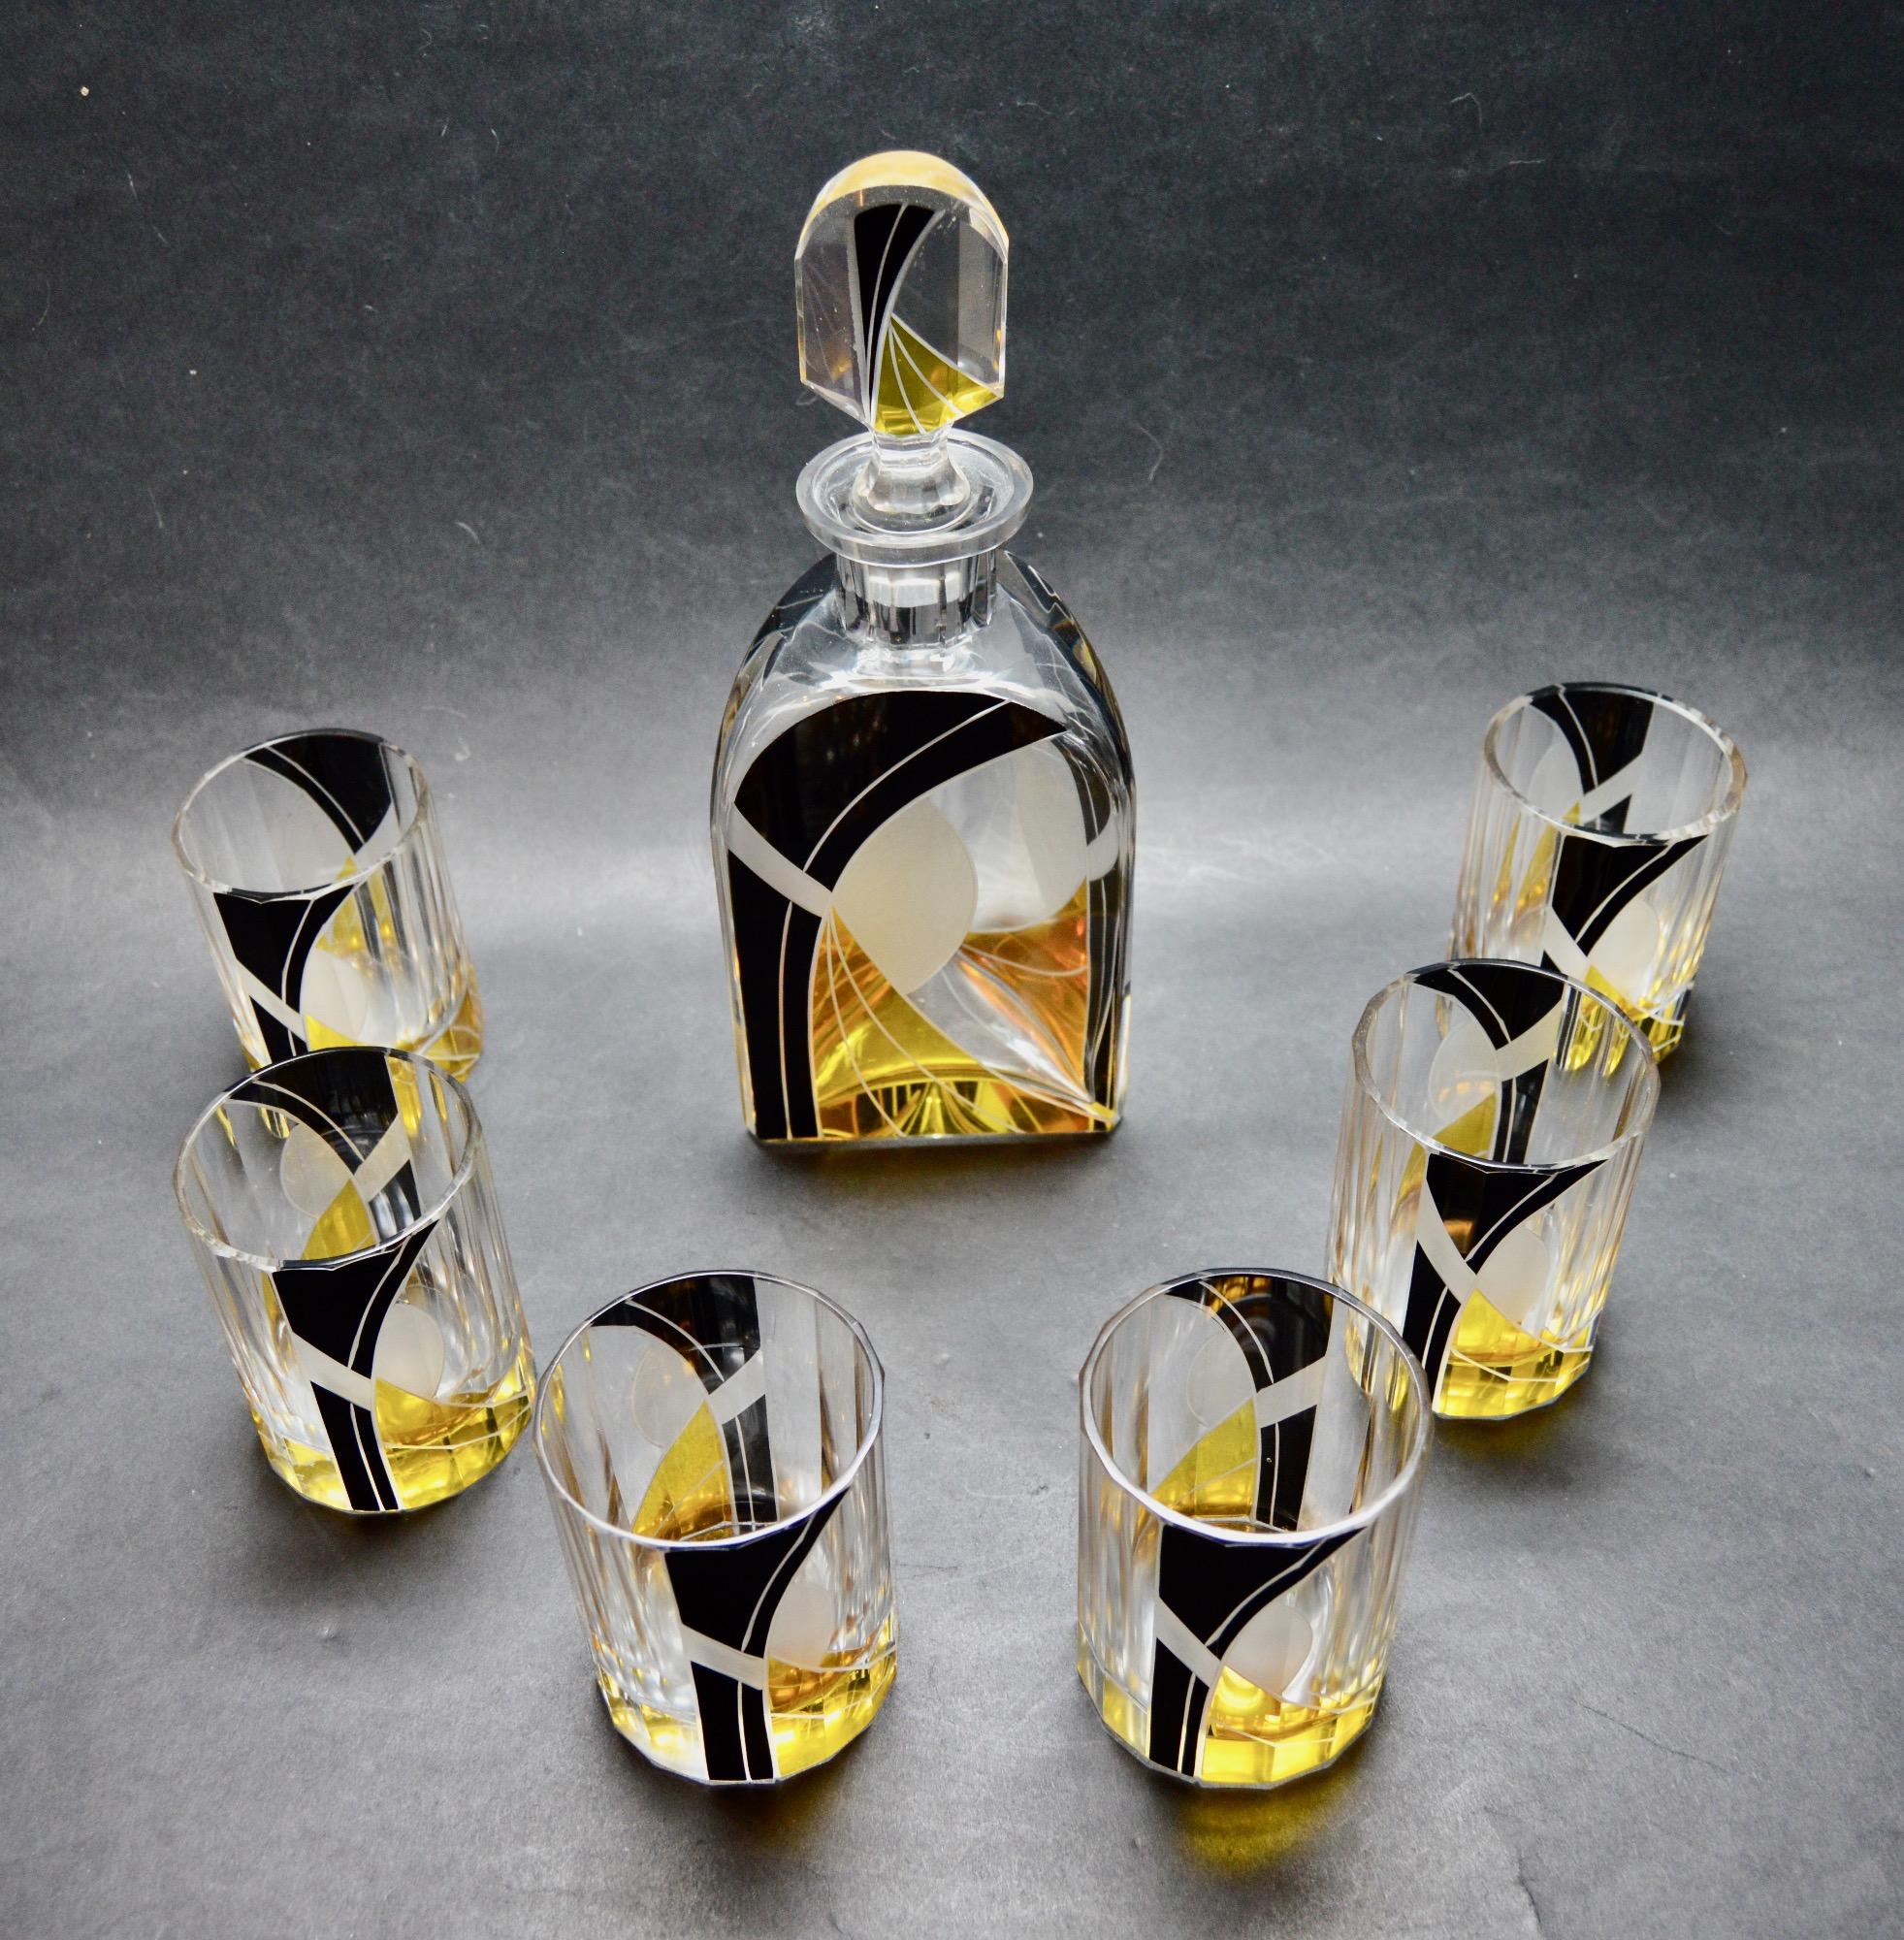 This decanter and glasses by Karl Palda is one of the nicest we have ever offered. All of the designs by this forward-thinking artist from the deco era in Czechoslovakia are quite wonderful but what sets this apart is the size of the glasses which